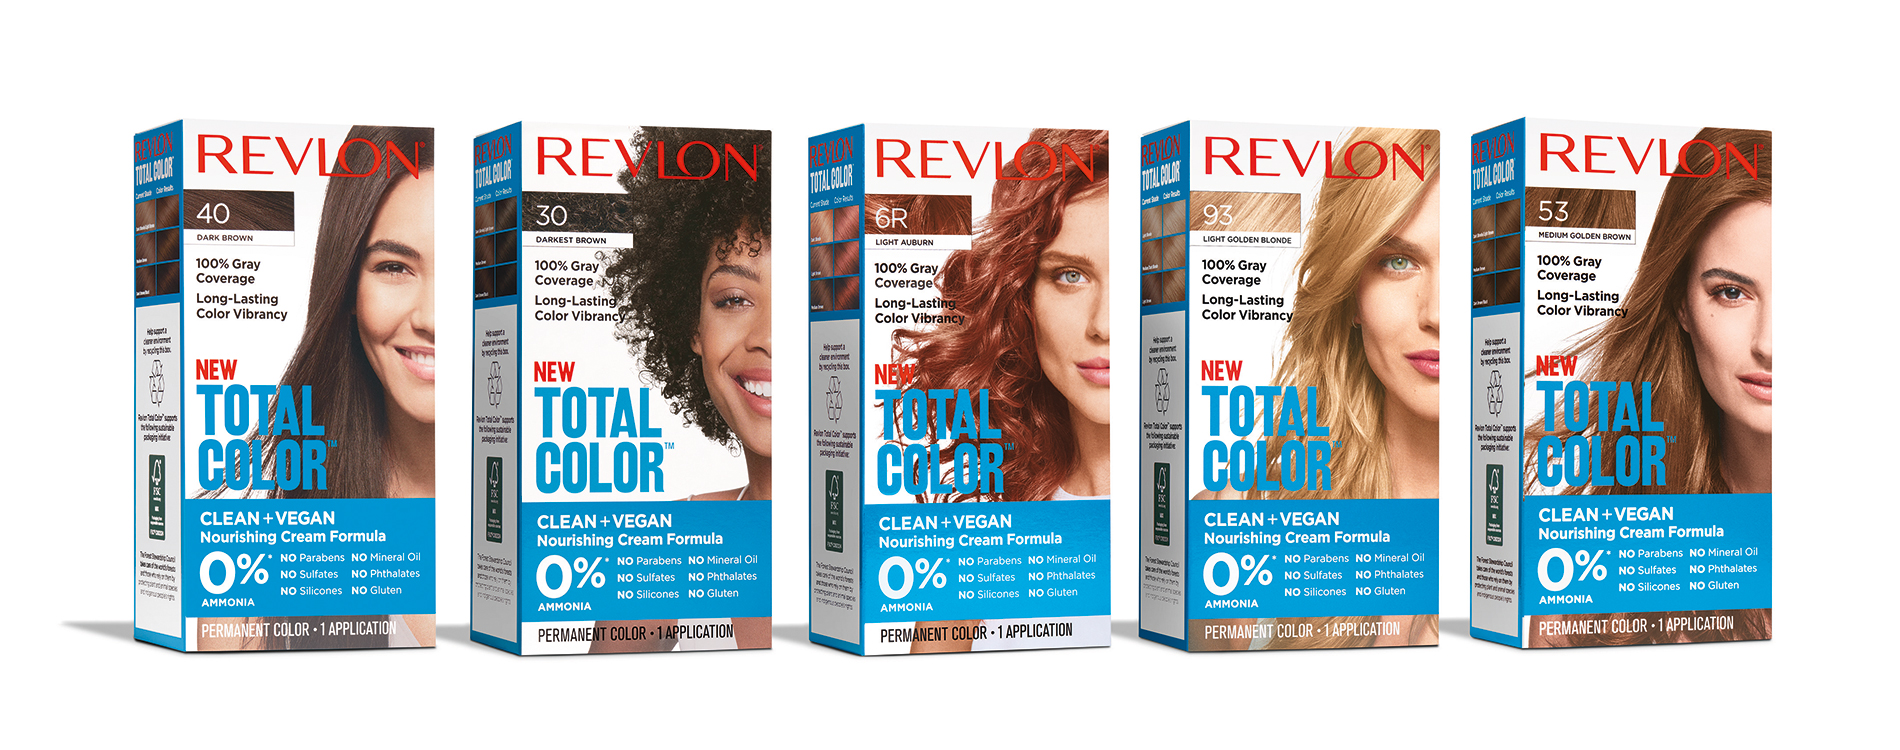 Revlon Launches Total Color, A New Breakthrough in Clean and Vegan Hair  Color